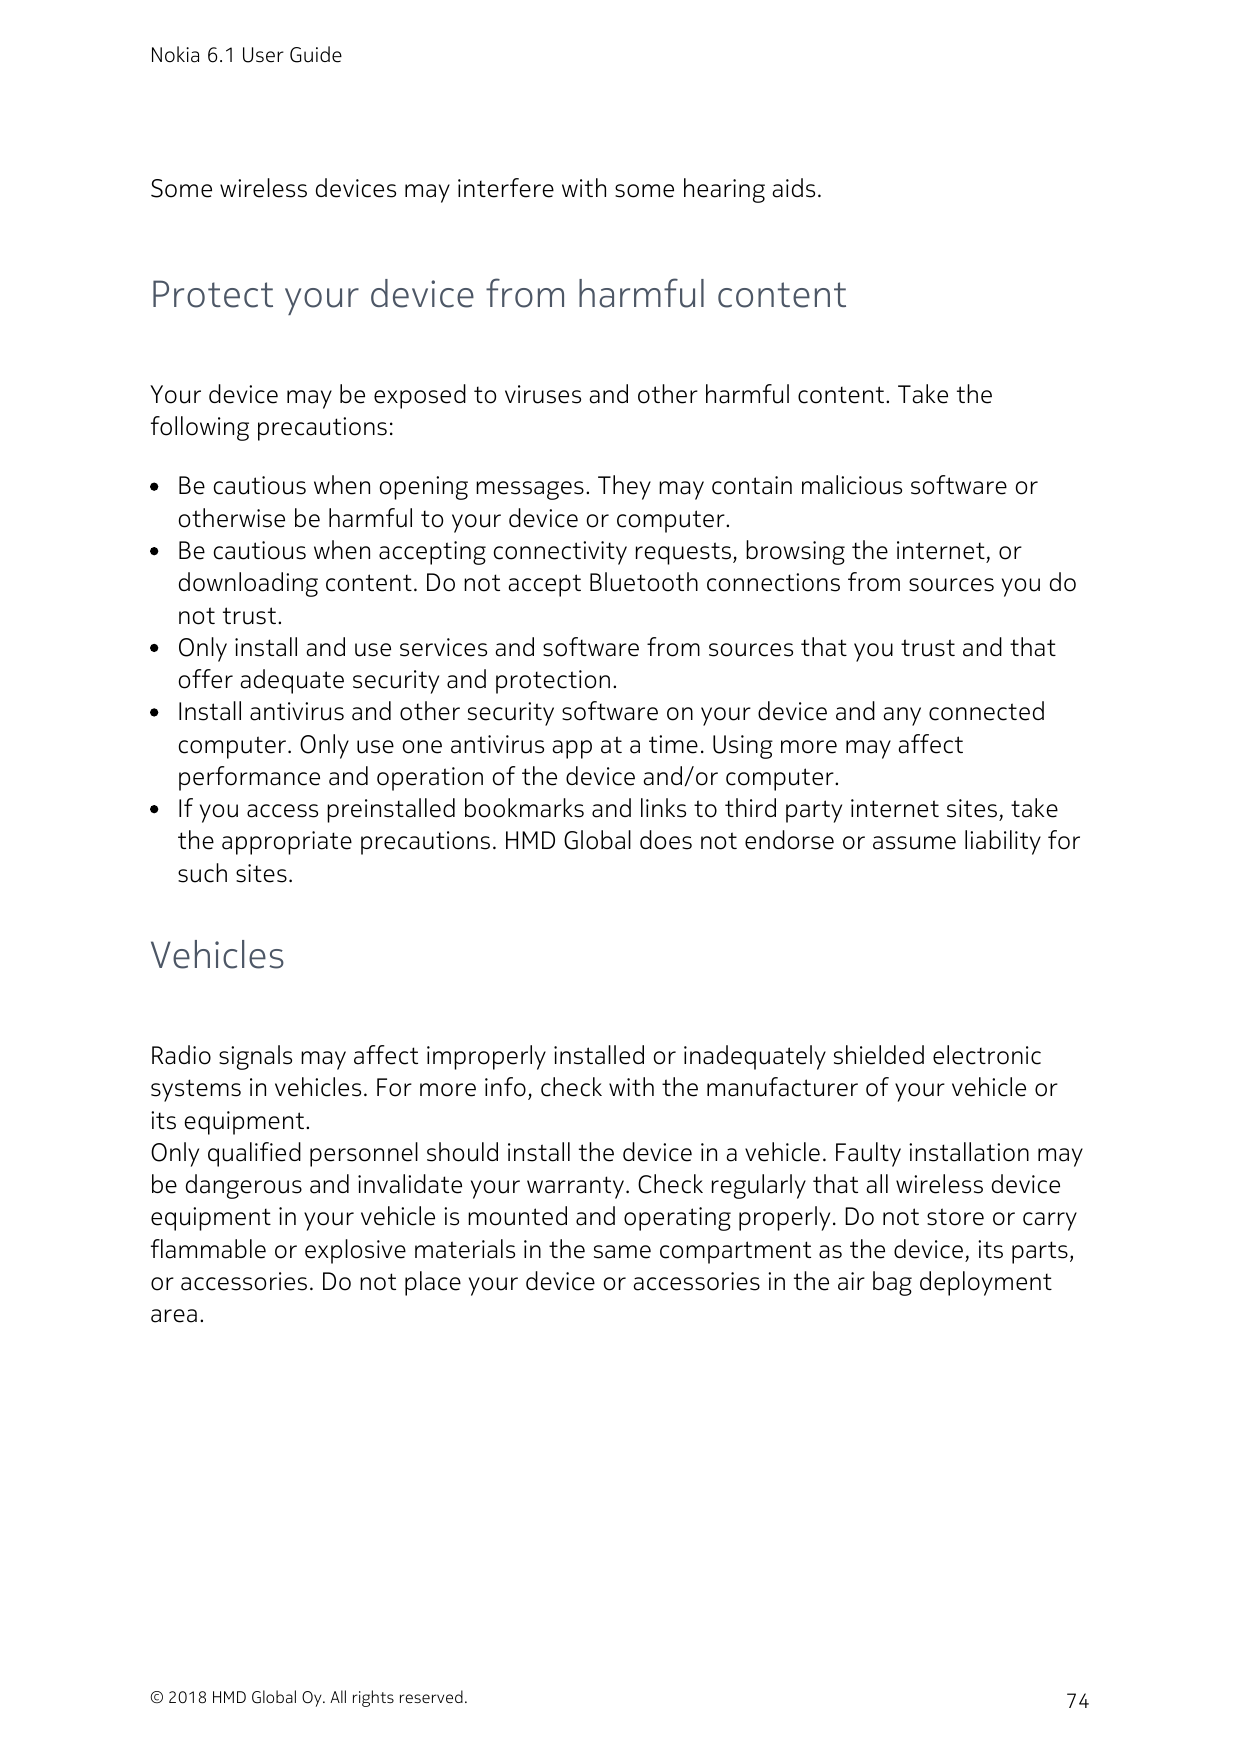 Nokia 6.1 User GuideSome wireless devices may interfere with some hearing aids.Protect your device from harmful contentYour devi